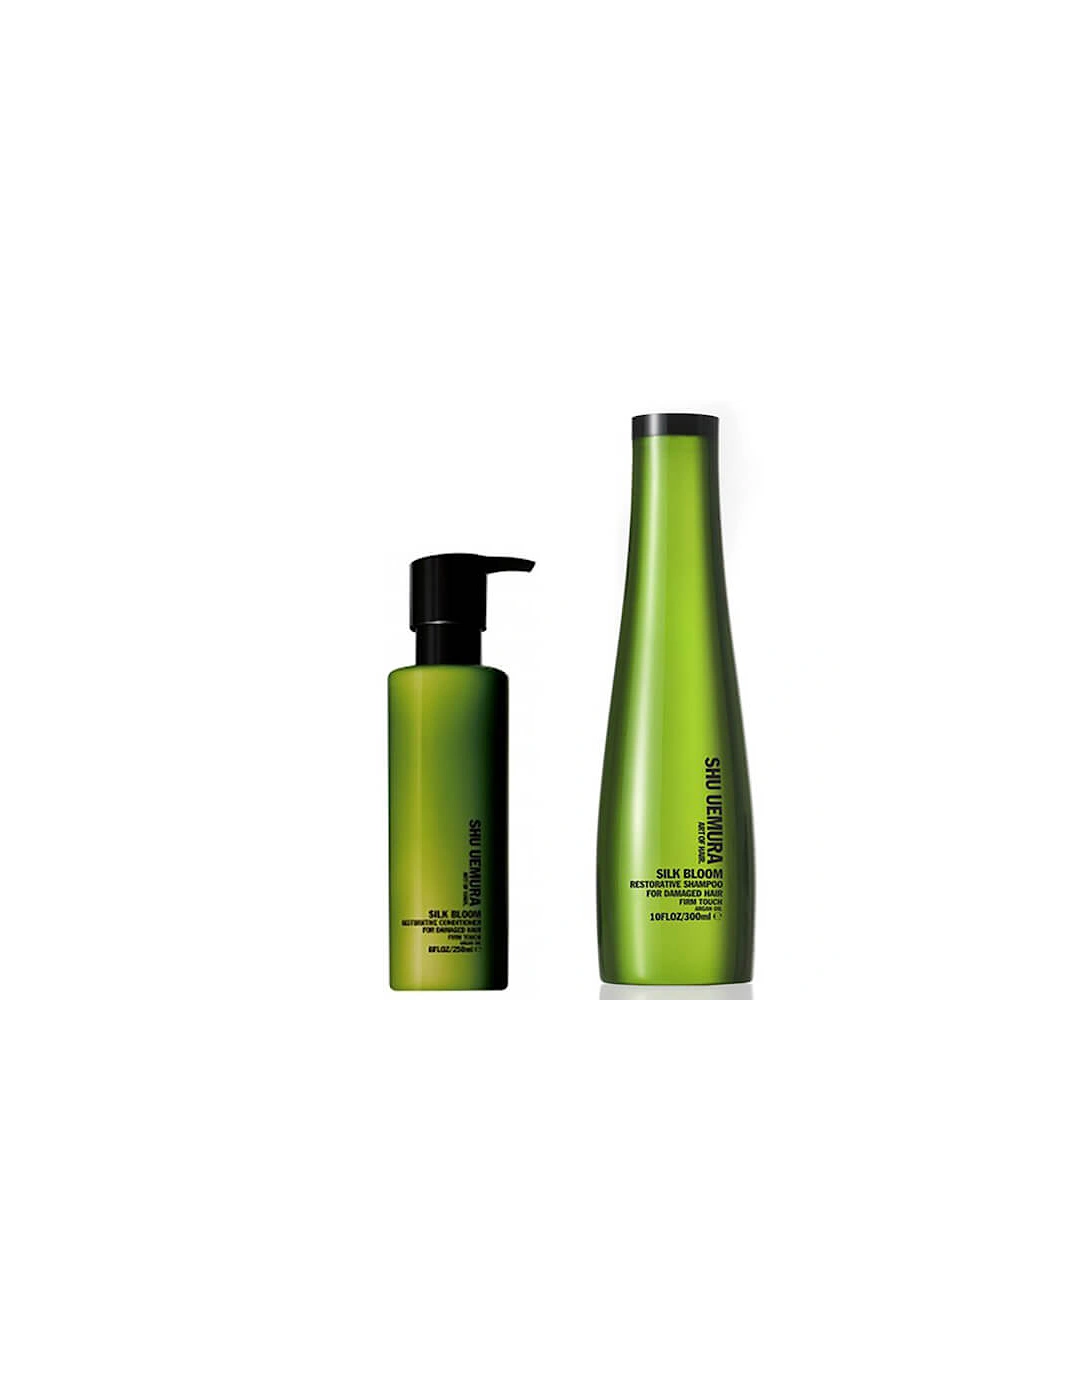 Art of Hair Silk Bloom Shampoo (300ml) and Conditioner (250ml), 2 of 1